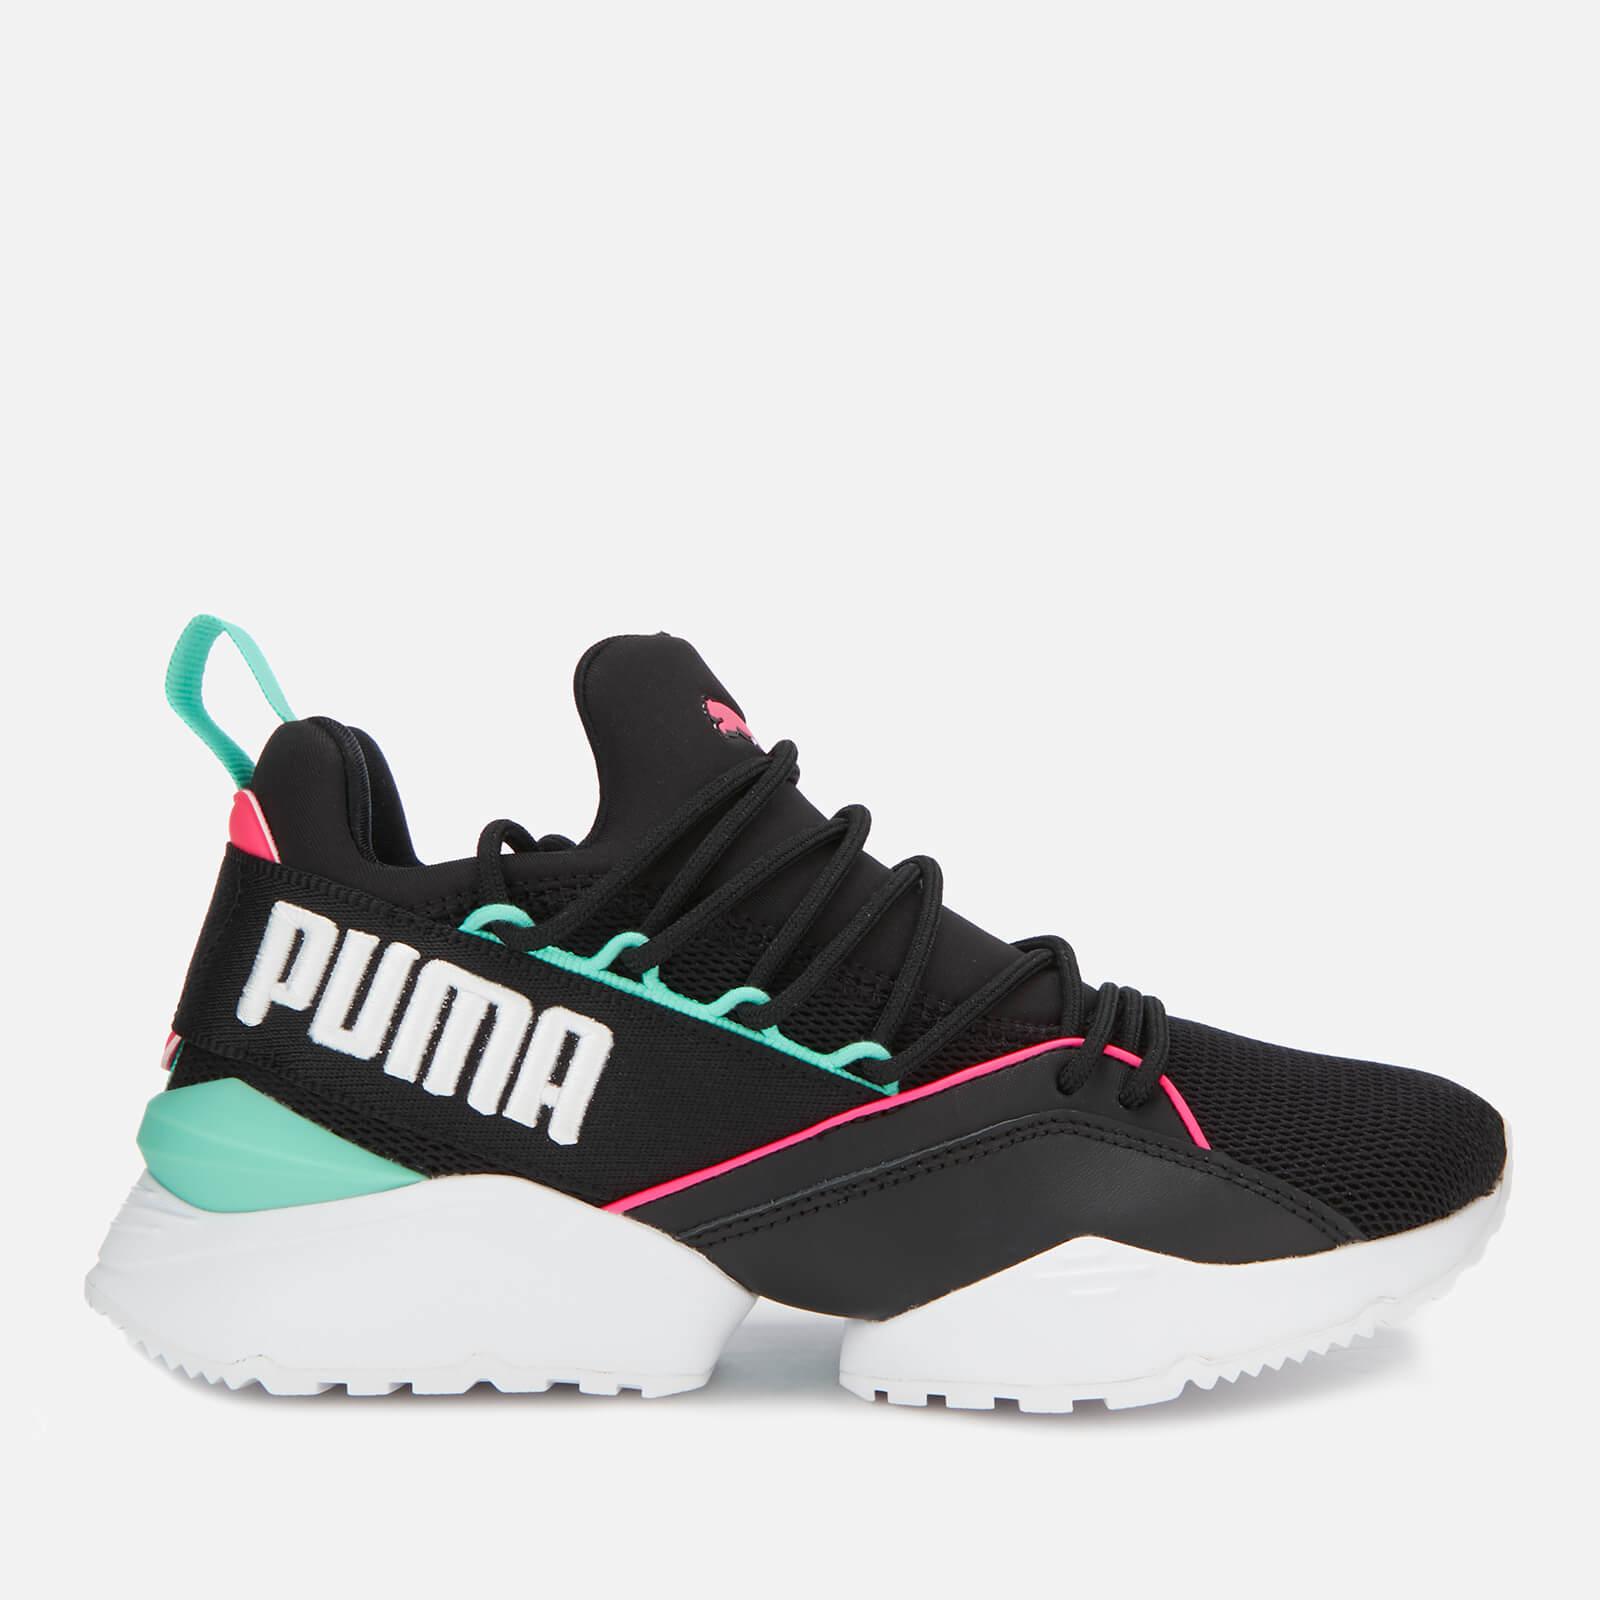 PUMA Rubber Muse Maia Street 1 Womens Trainers Black Pink - 4 Uk - Lyst